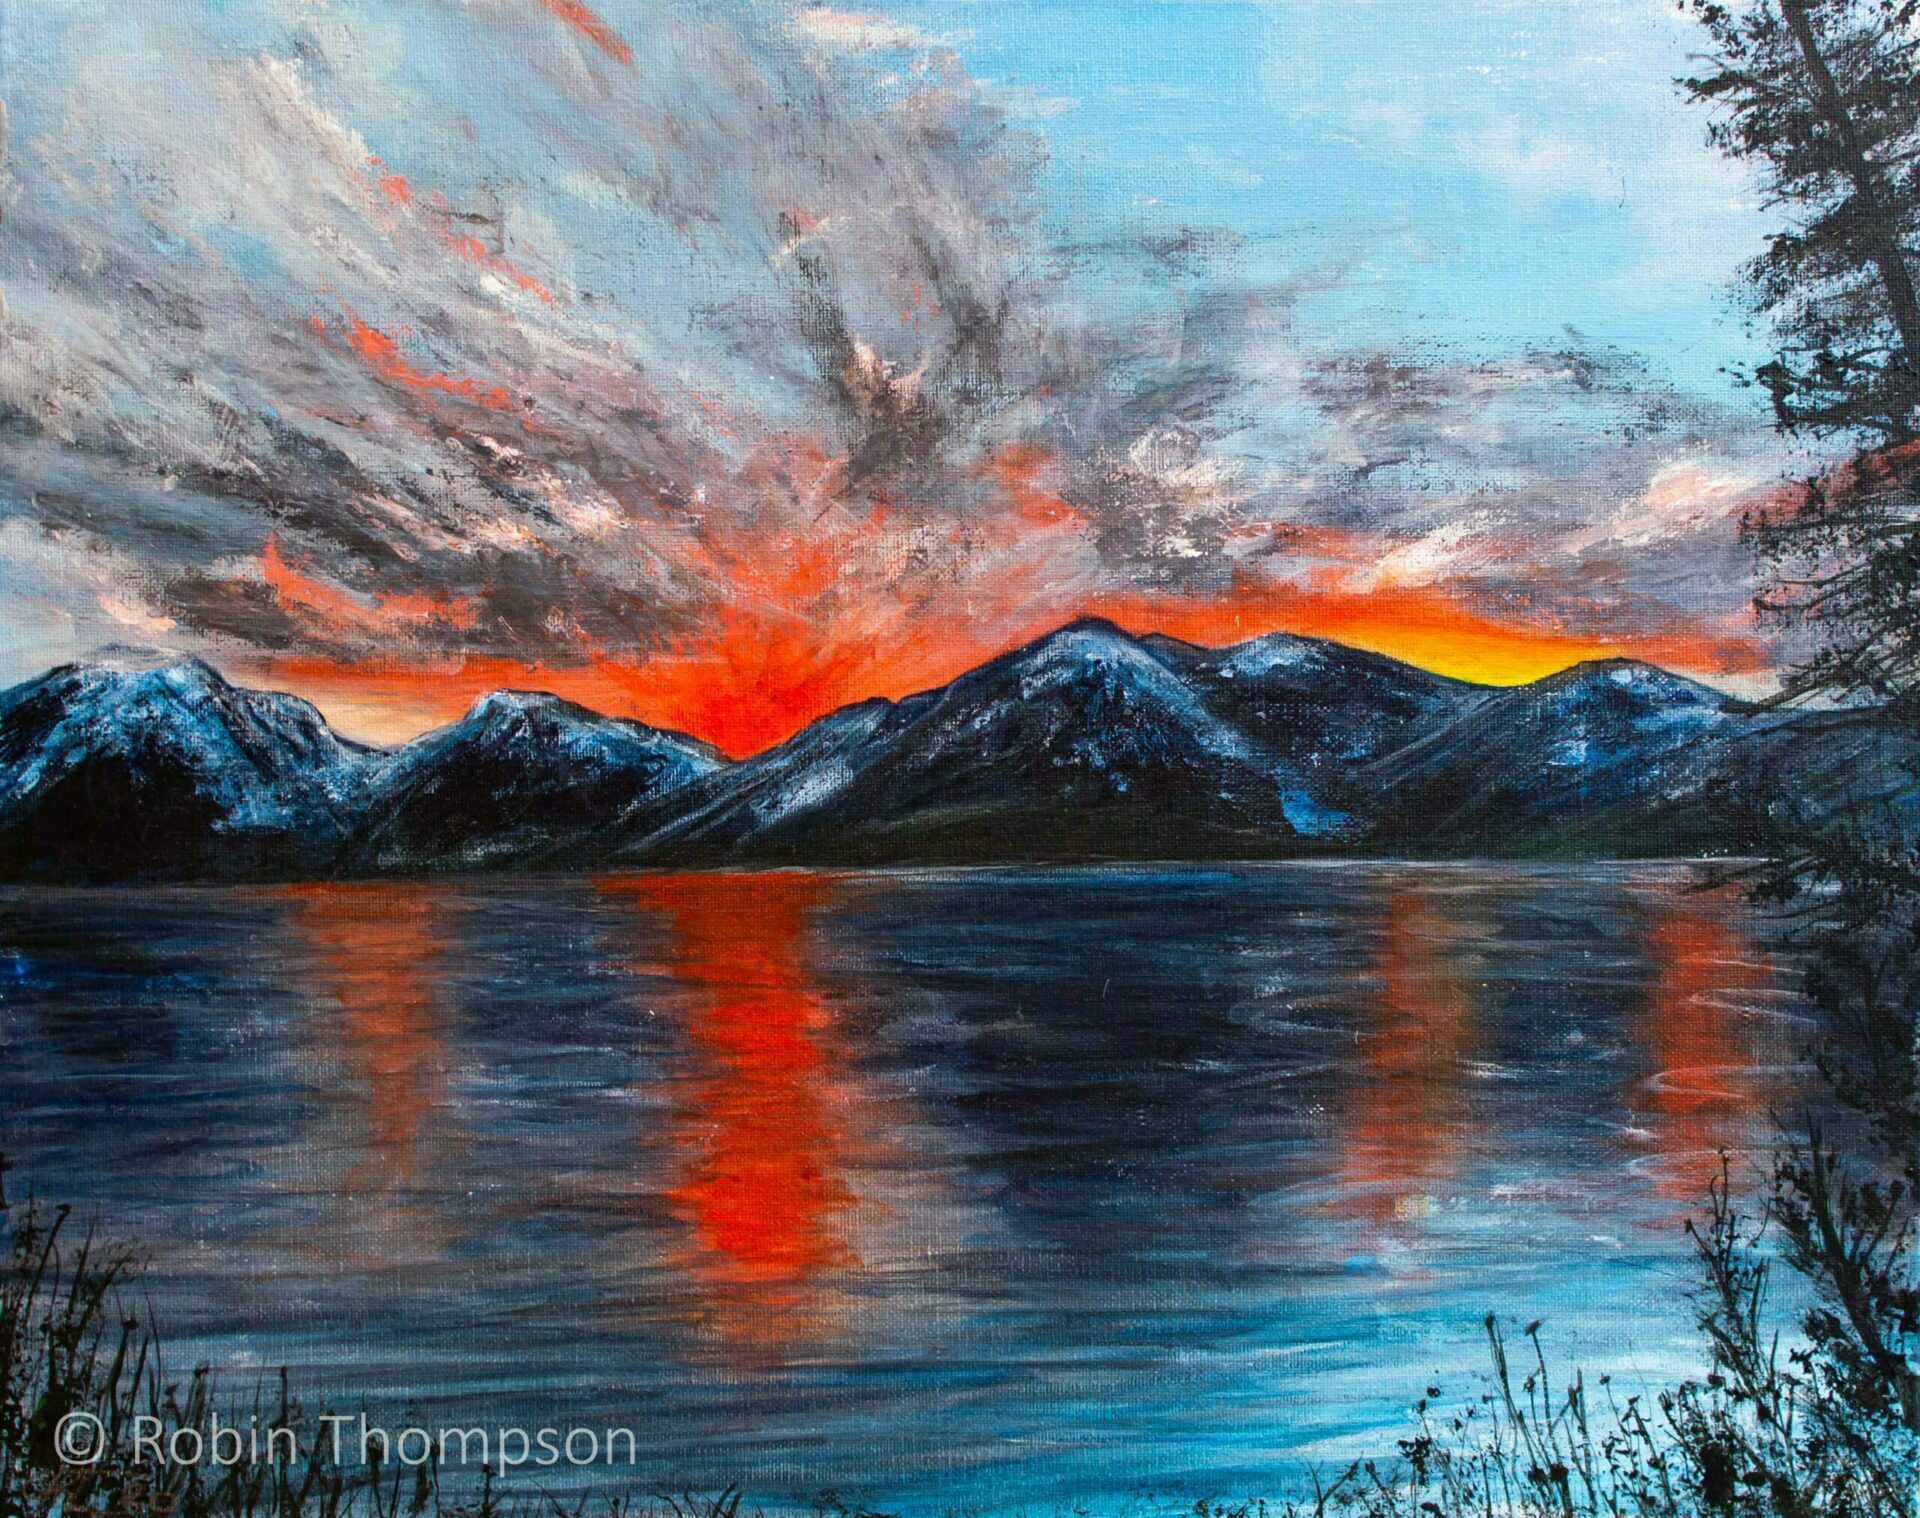 An acrylic painting of a blue and red mountain scene. Expressive clouds are painted in darker greys, adding drama to the sunset over the blue mountains. In the foreground are various trees and water plants painted in black.